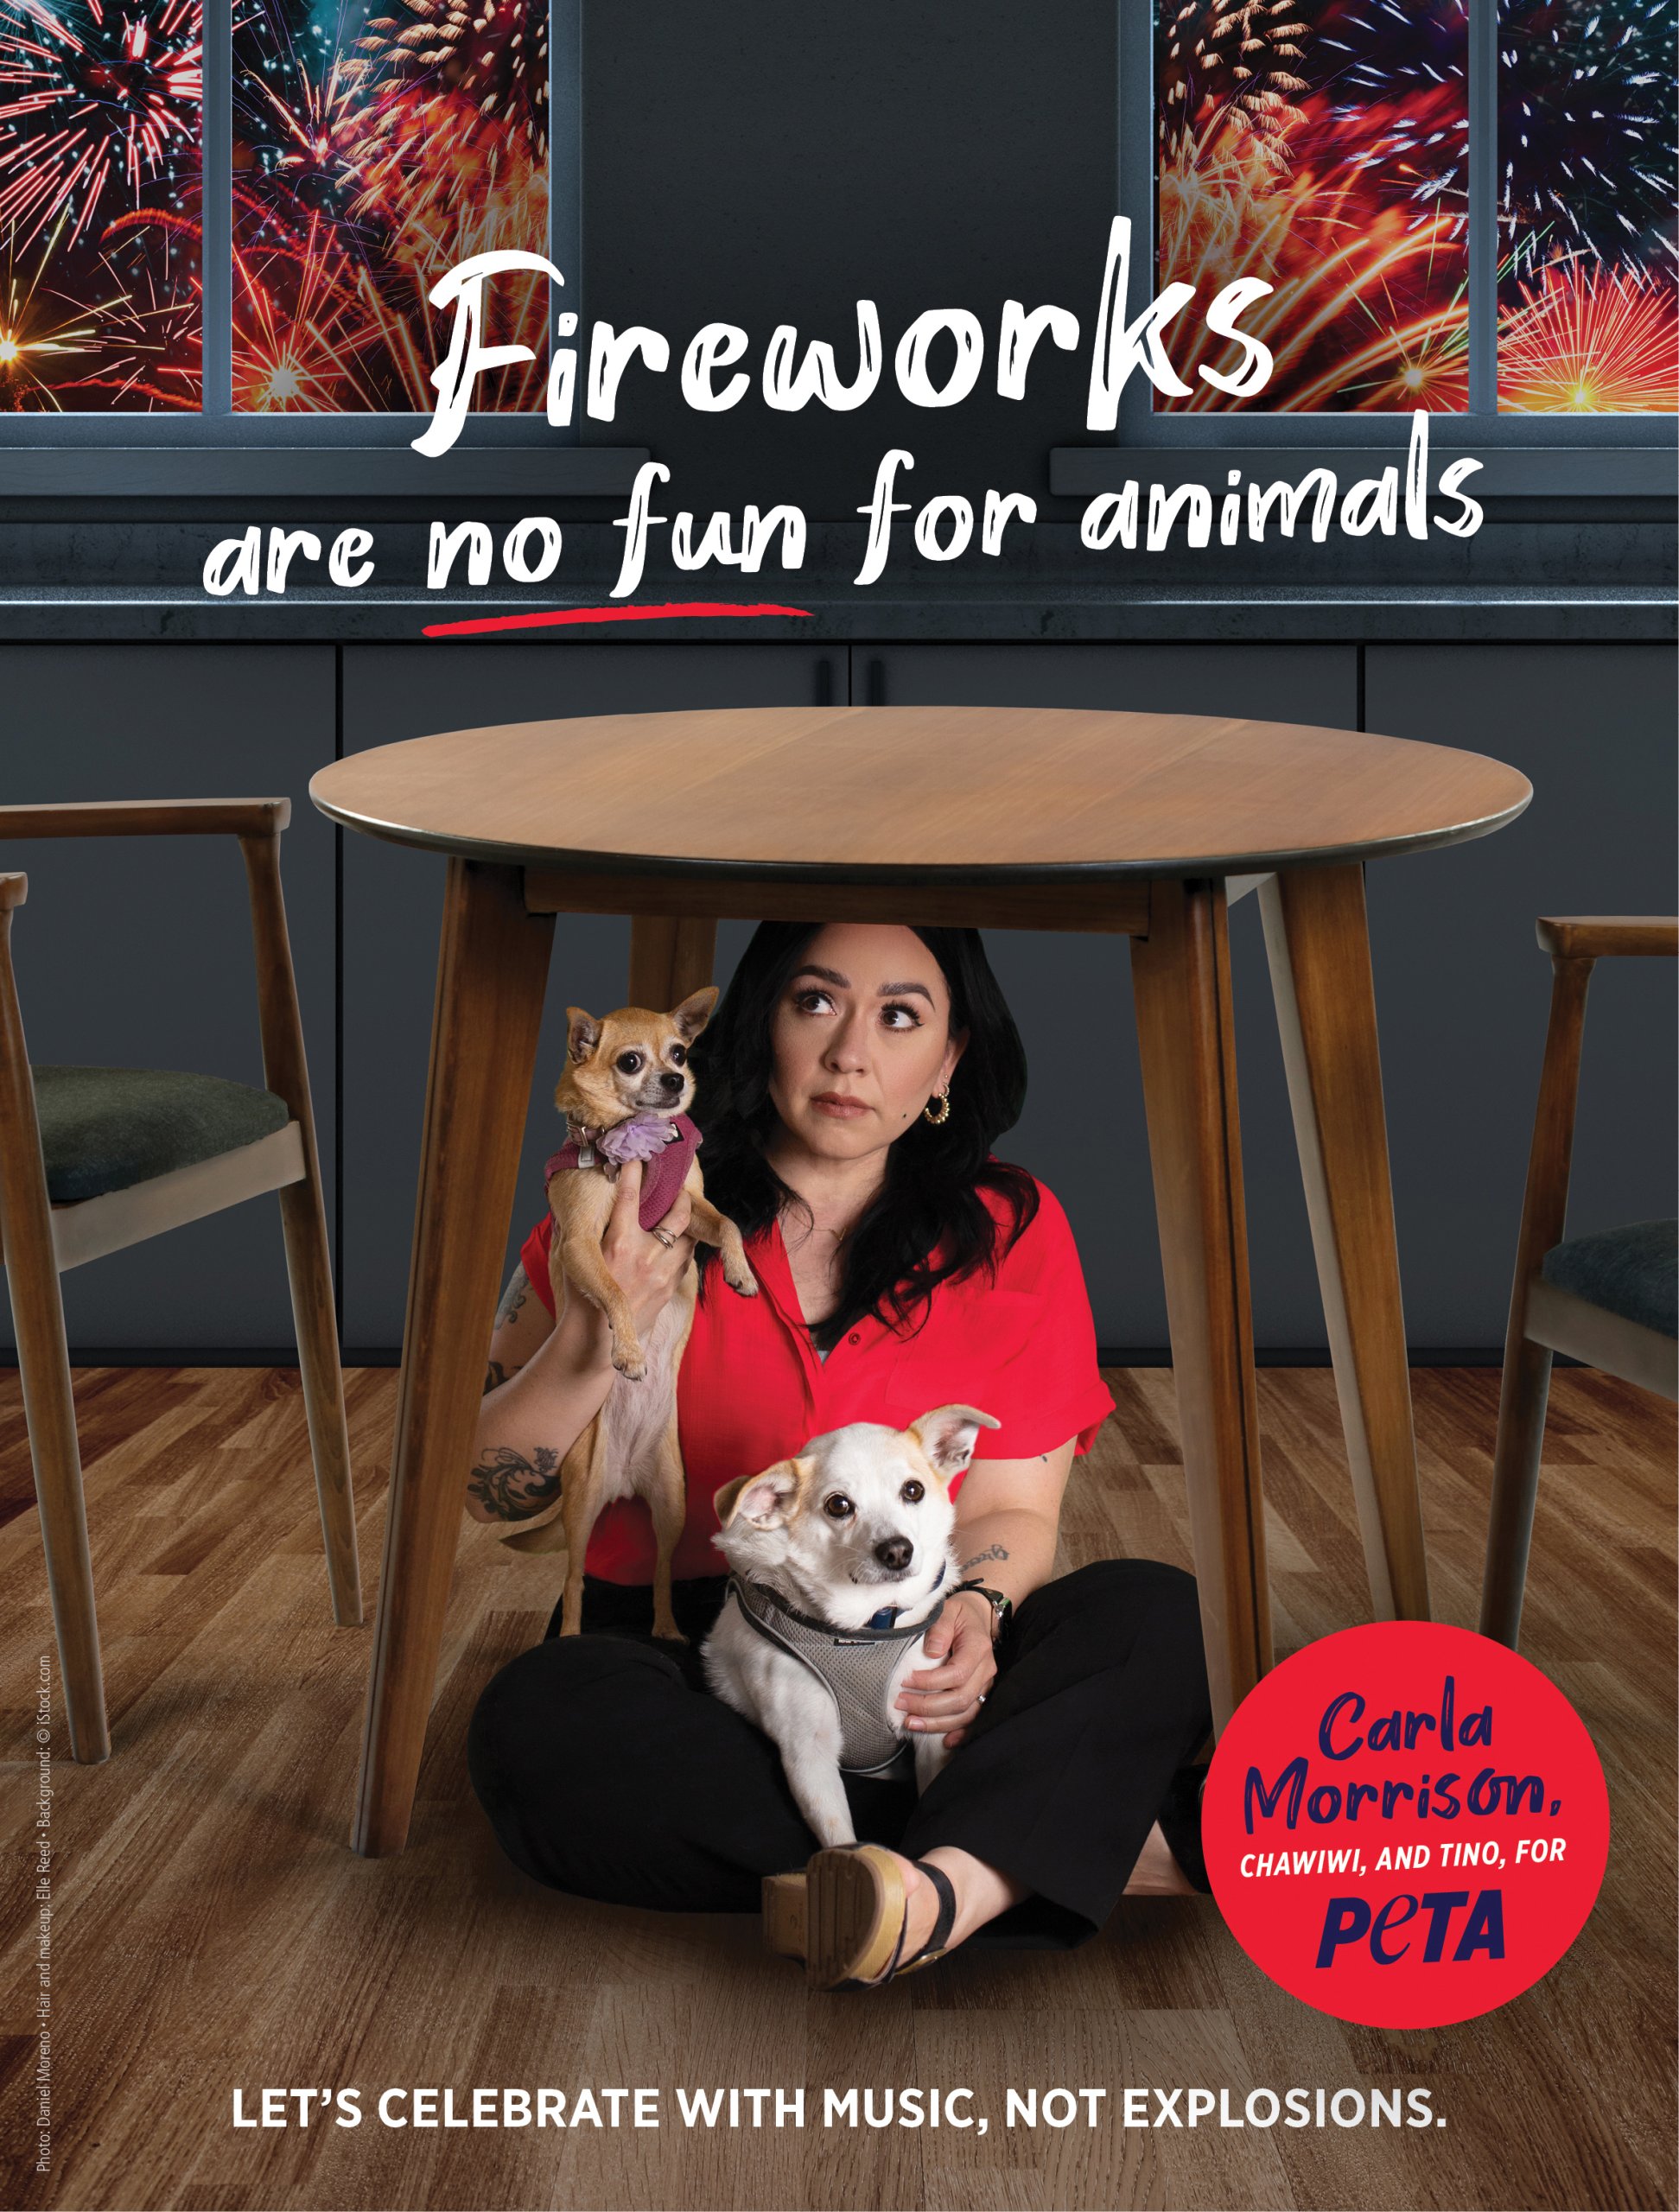 Ad of Carla Morrison hiding under a table with two dogs as superimposed fireworks shoot outside. The text reads fireworks are no fun for animals